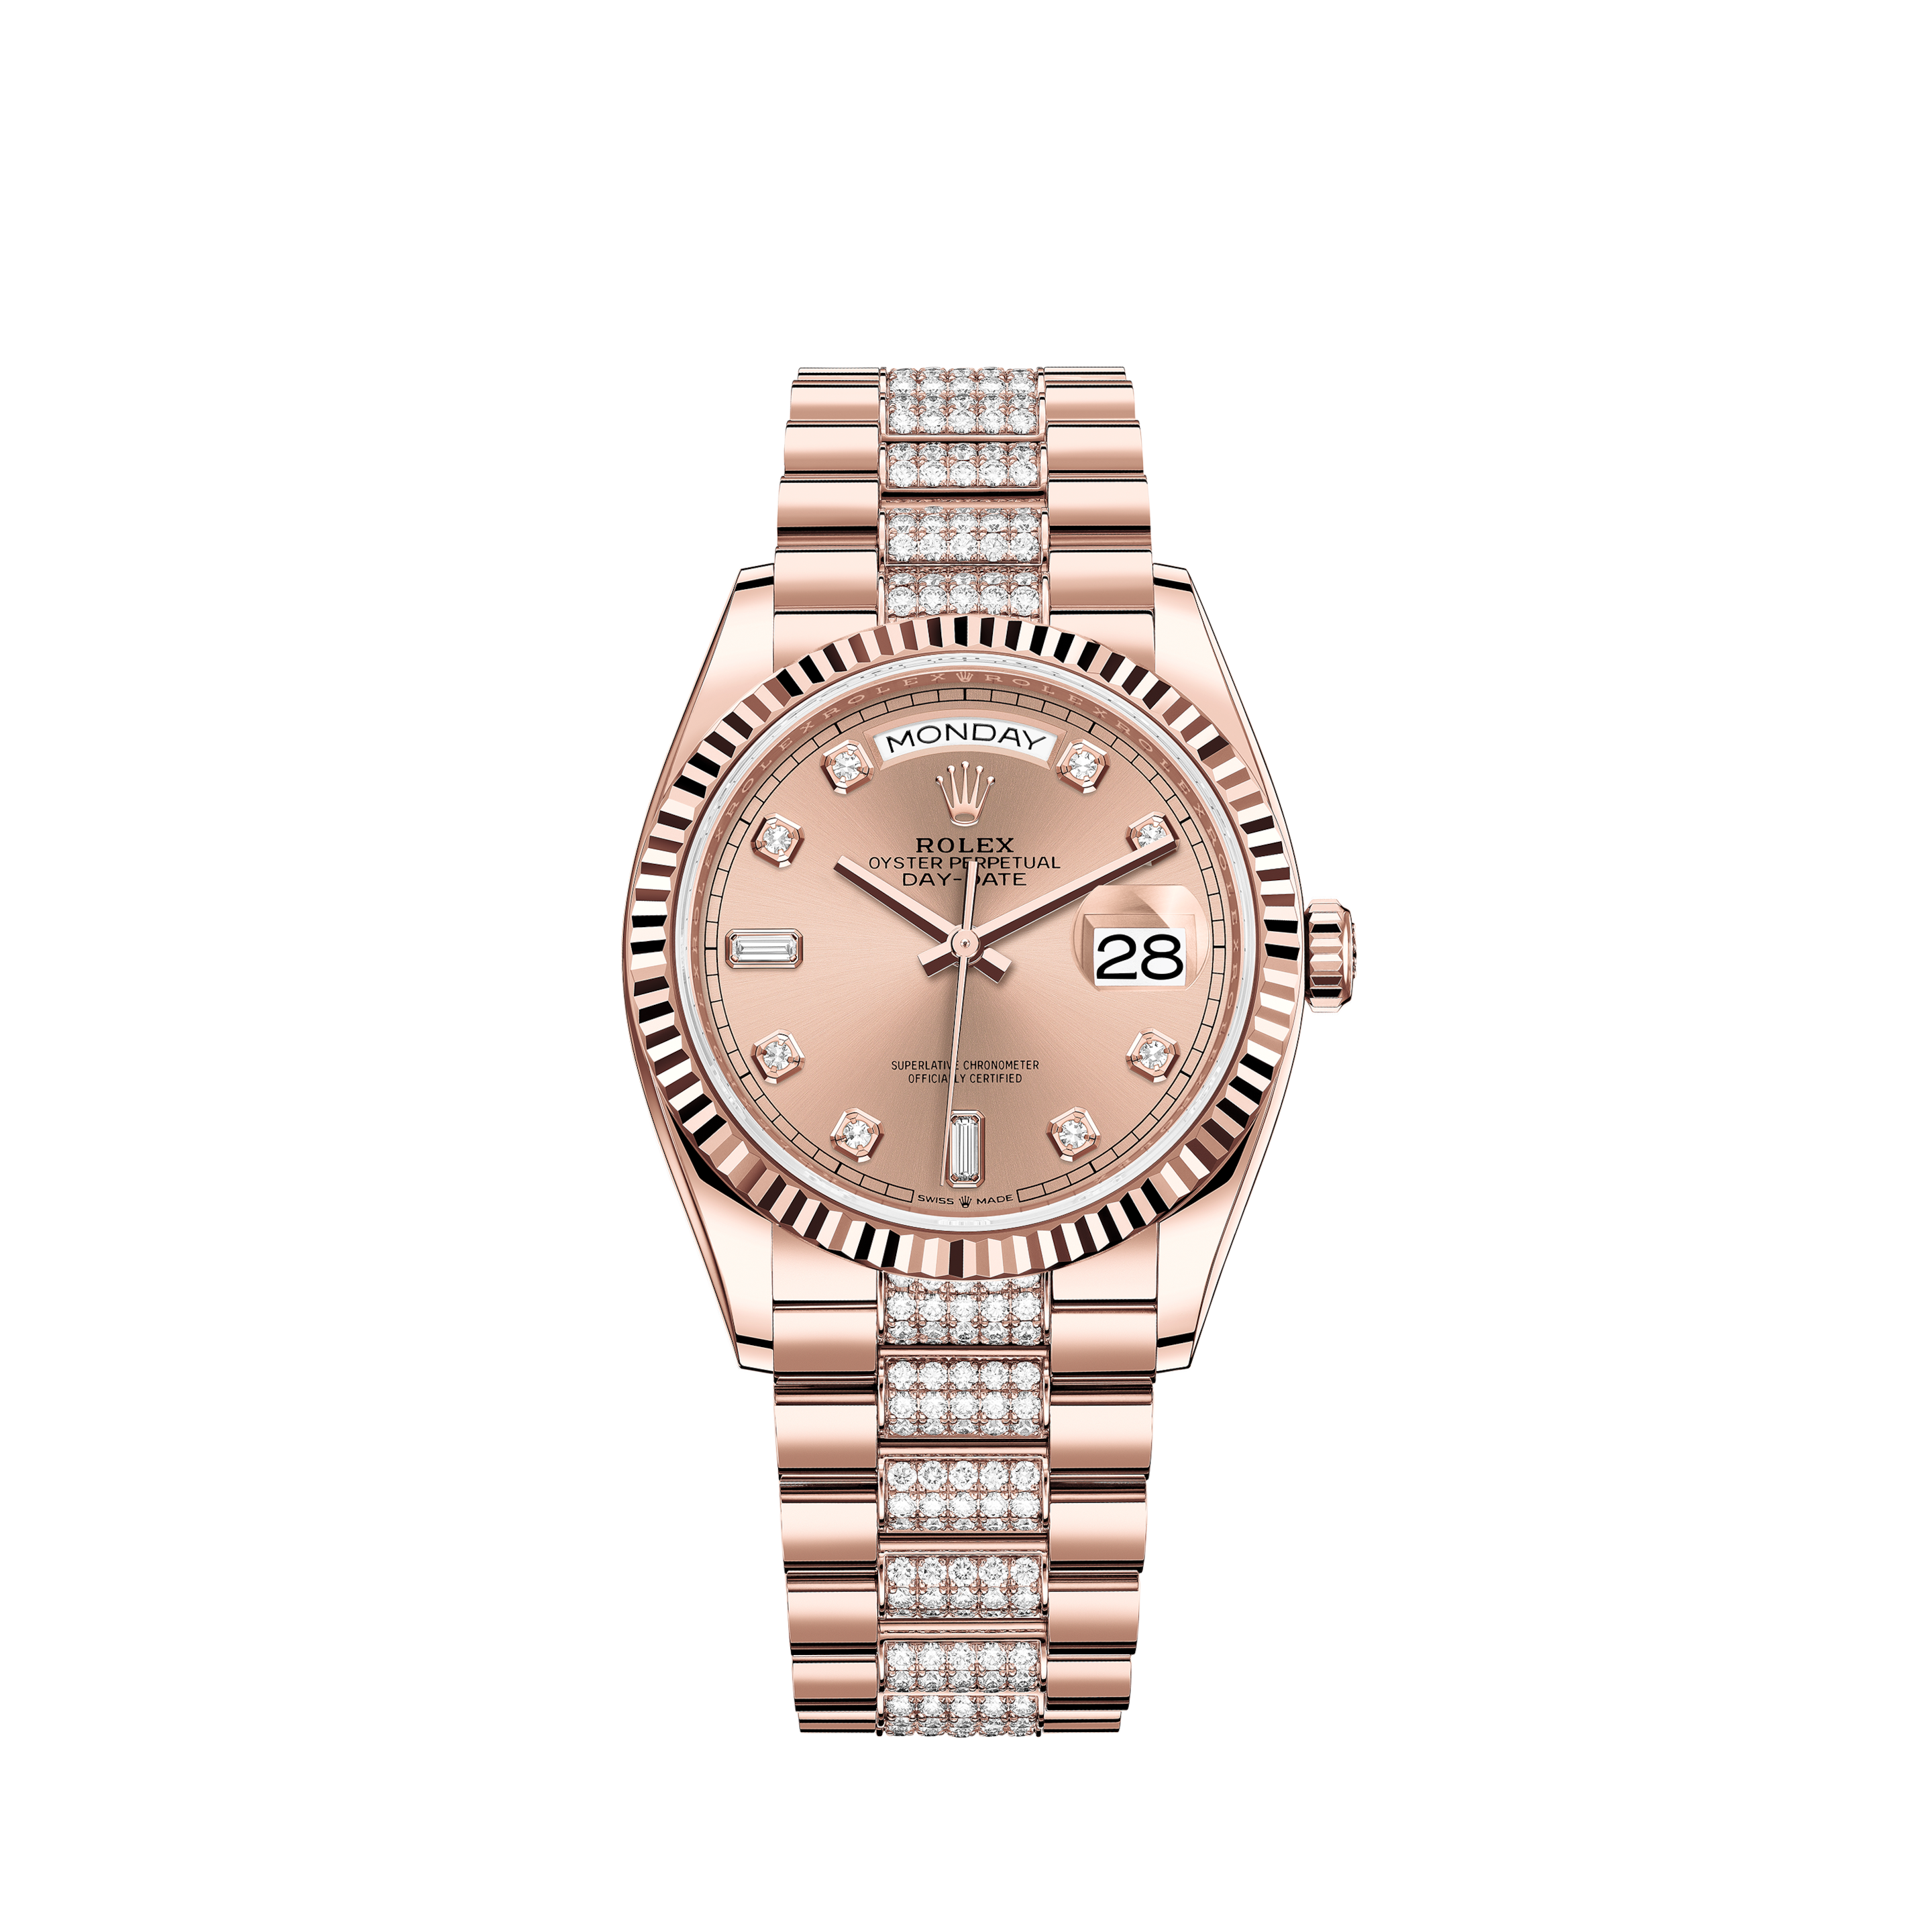 Rolex Oyster Perpetual Date Ref.115200 Pink Dial, Immaculate Condition, Full SetRolex Oyster Perpetual Date Ref.115234 with Diamonds, 18kt White Gold Flutted Bezel